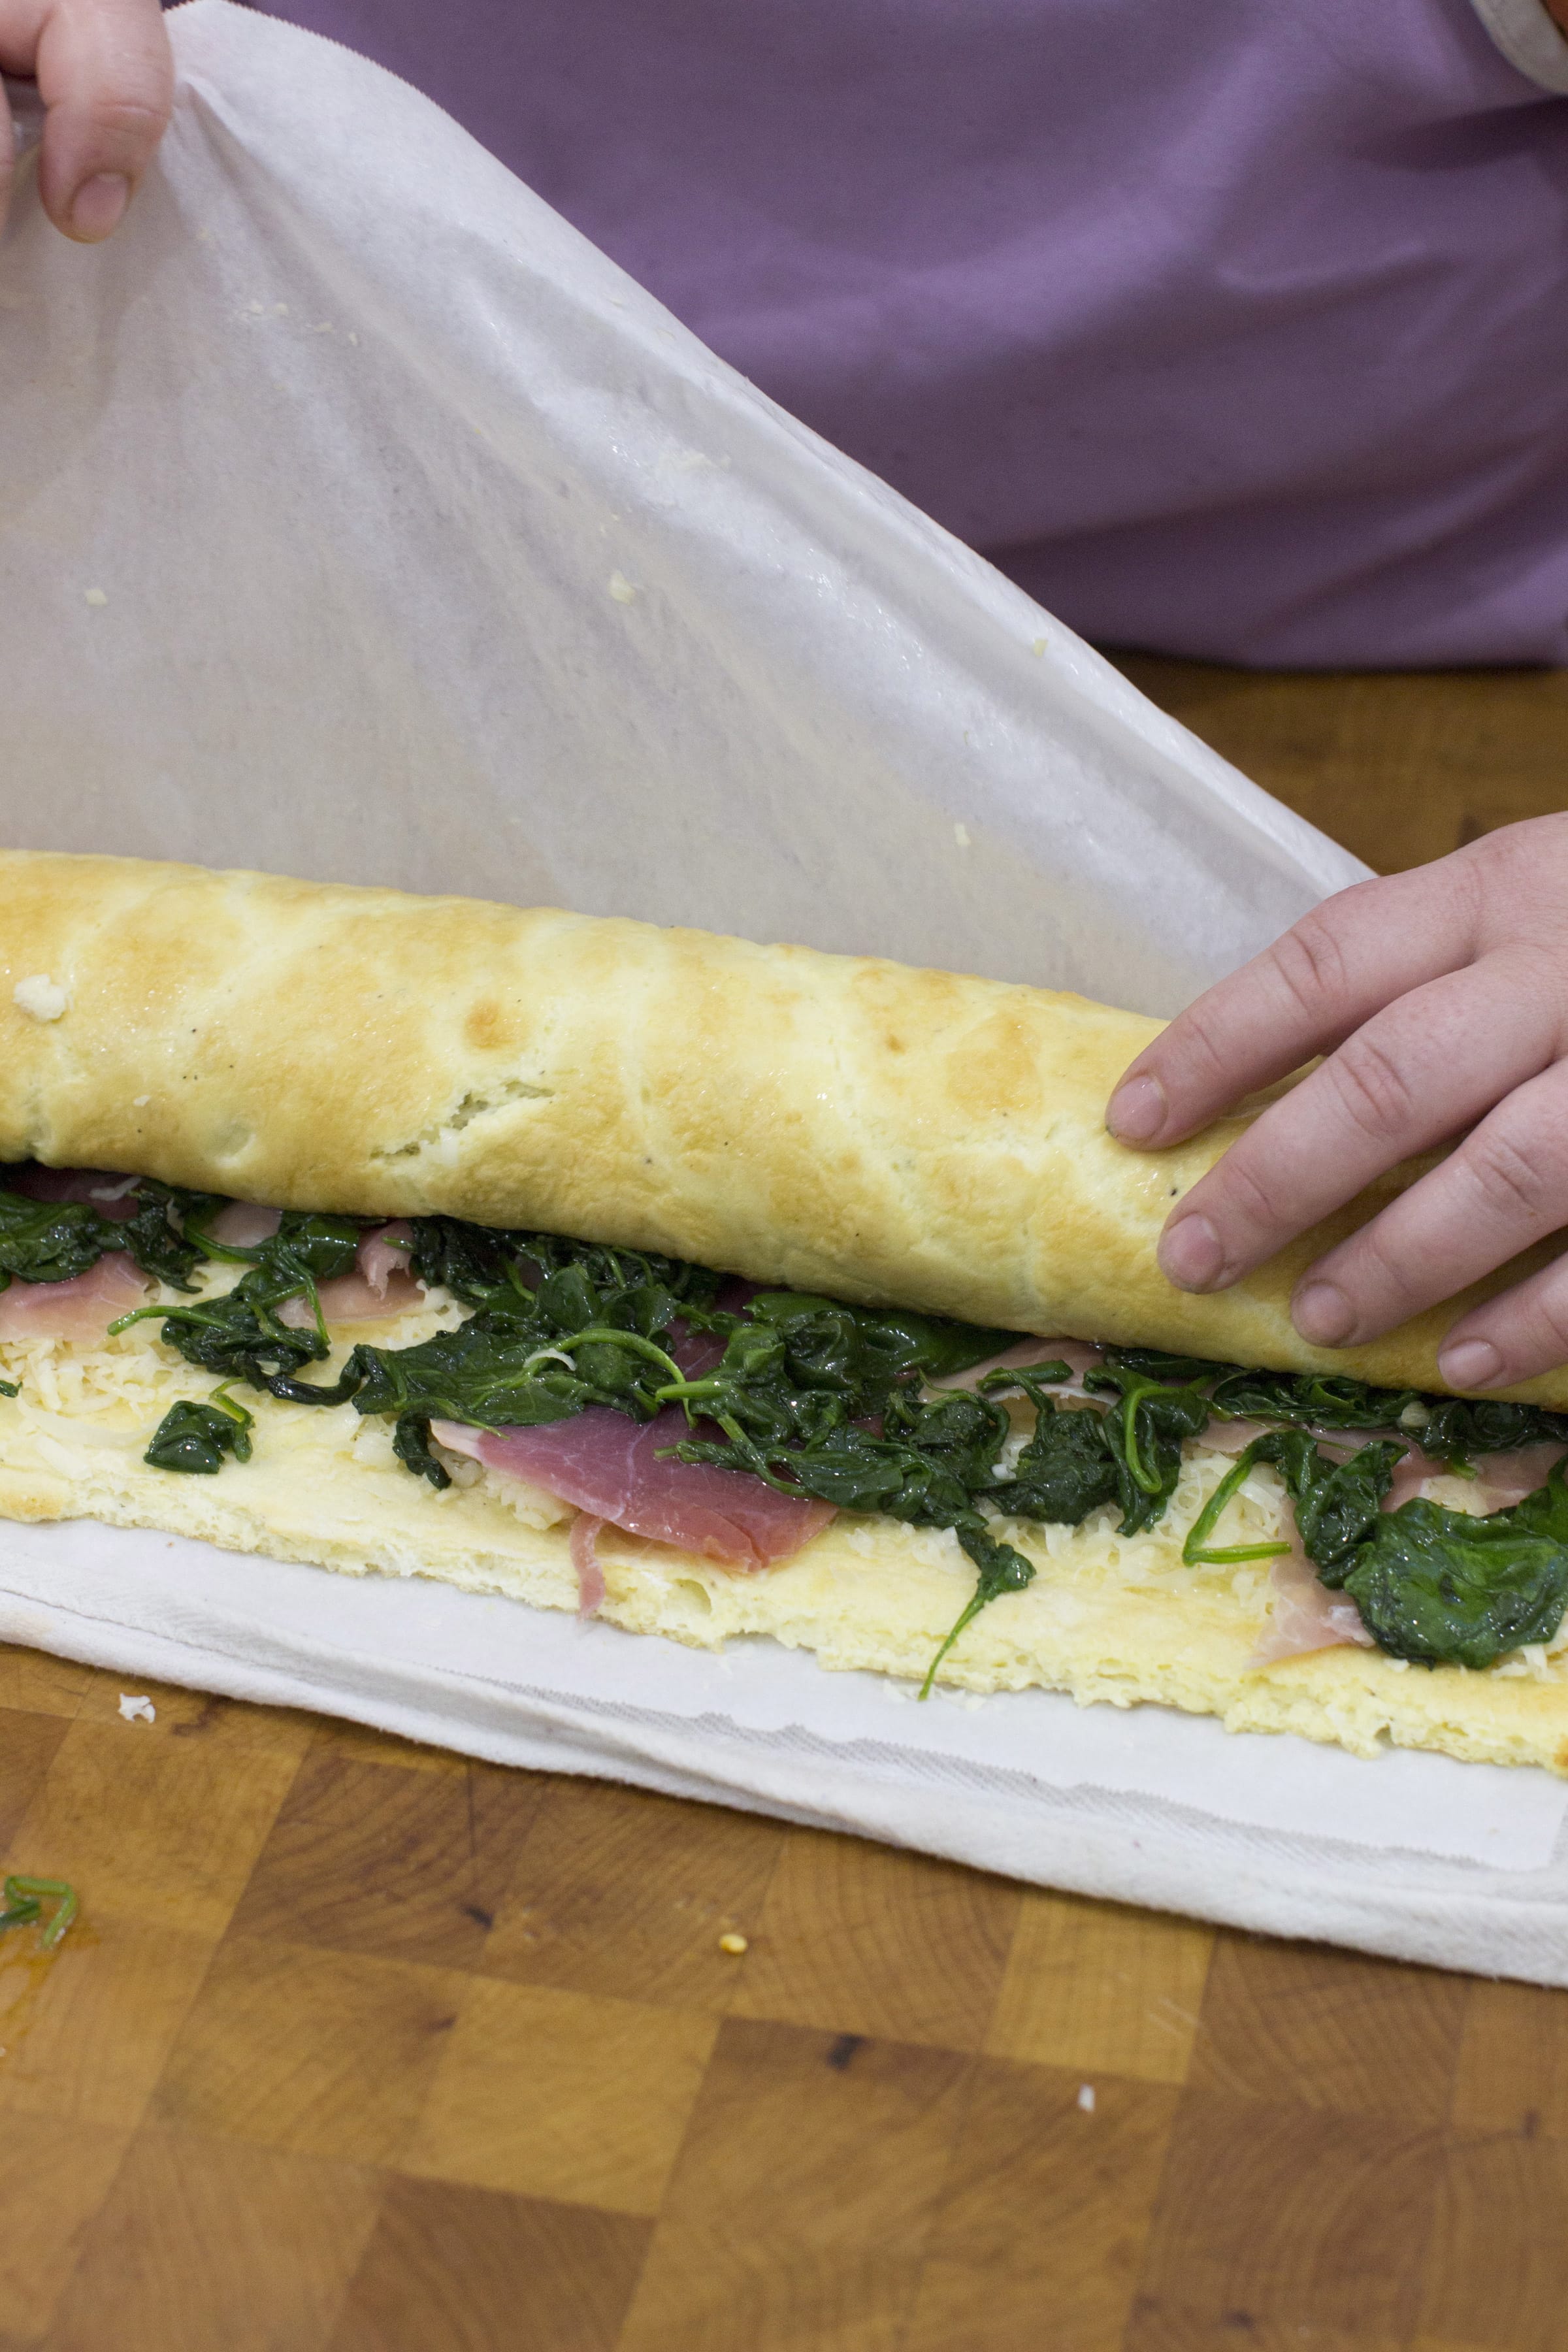 The making of an Egg Roulade Stuffed With Prosciutto, Spinach And Roasted Red Pepper